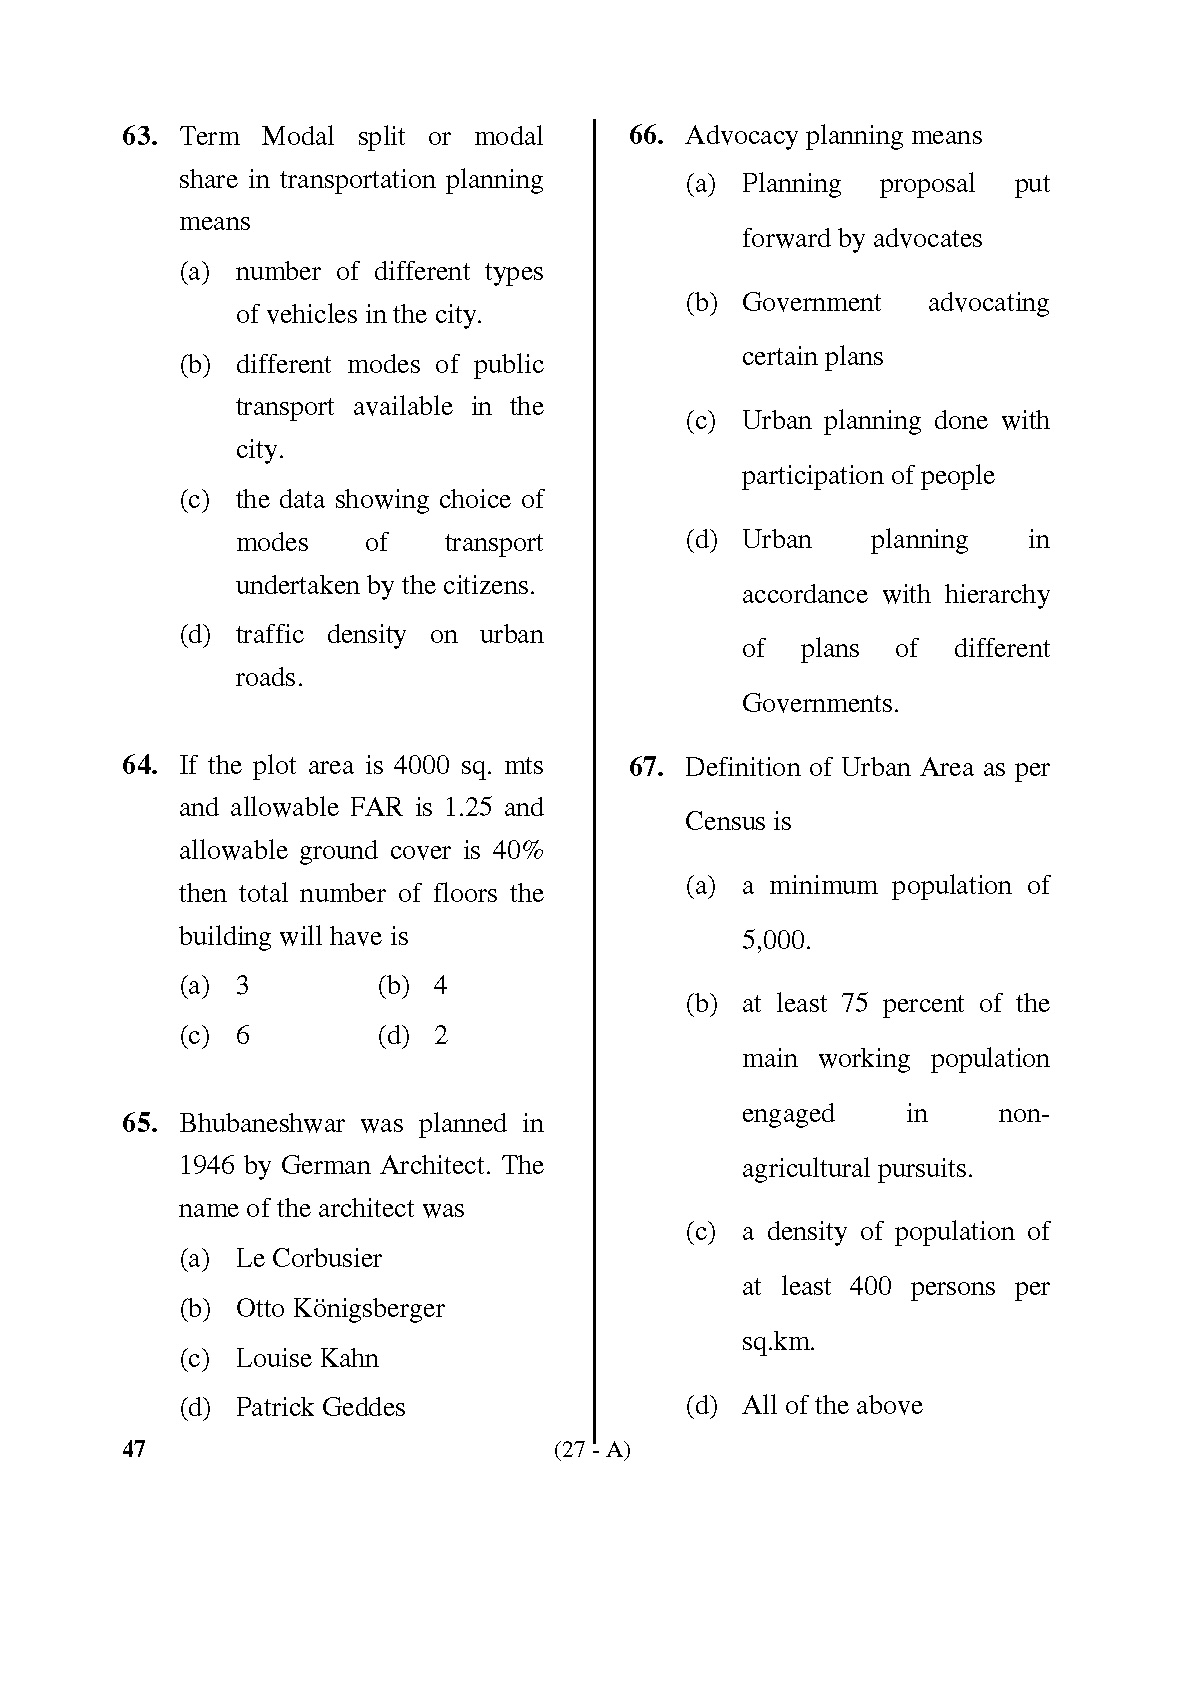 Karnataka PSC Town Planners Exam Sample Question Paper 26